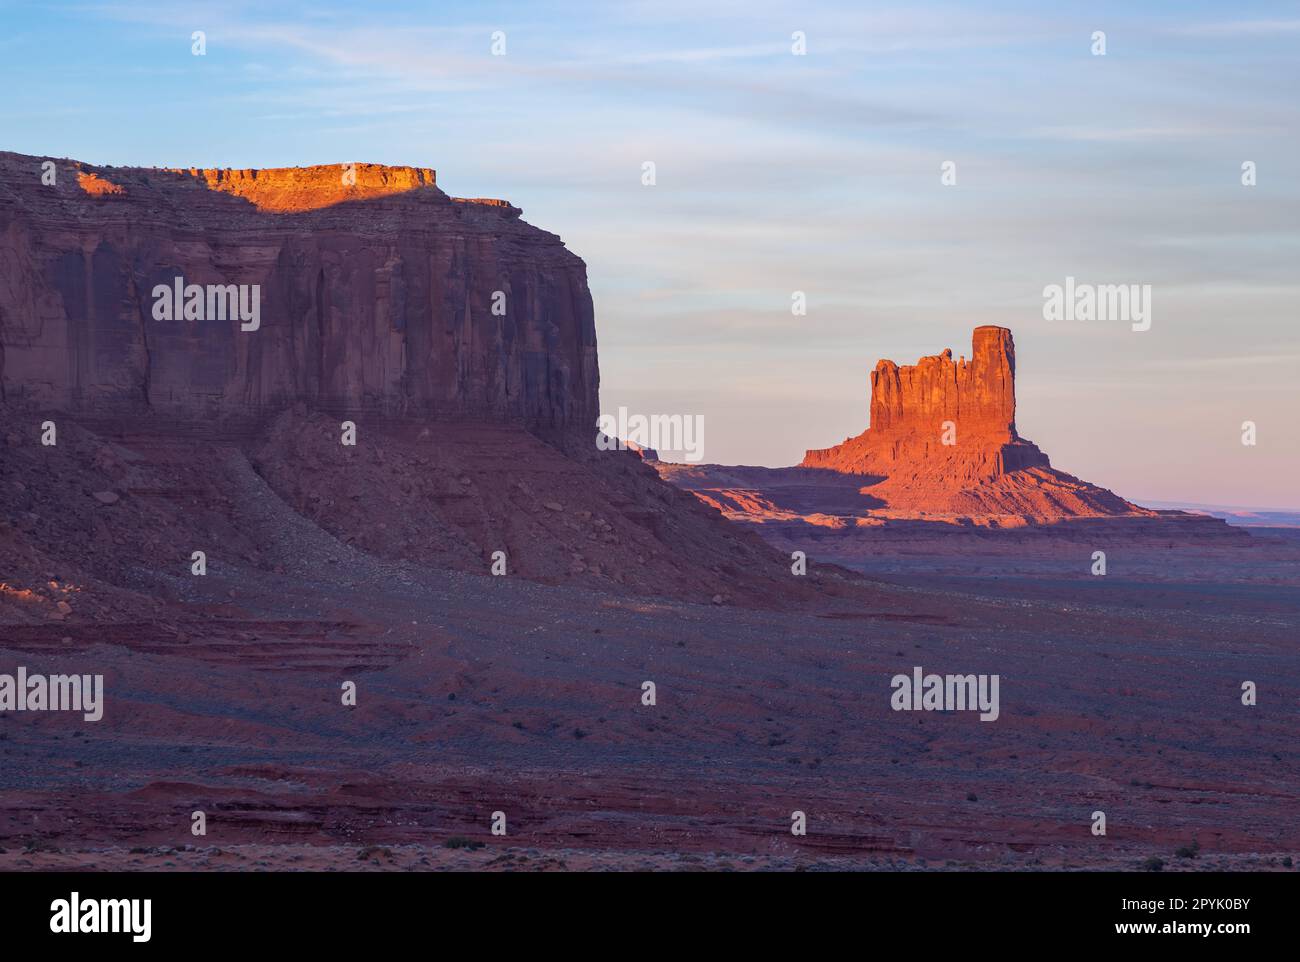 Monument Valley Landscape at Sunset - Big Indian Butte Stockfoto